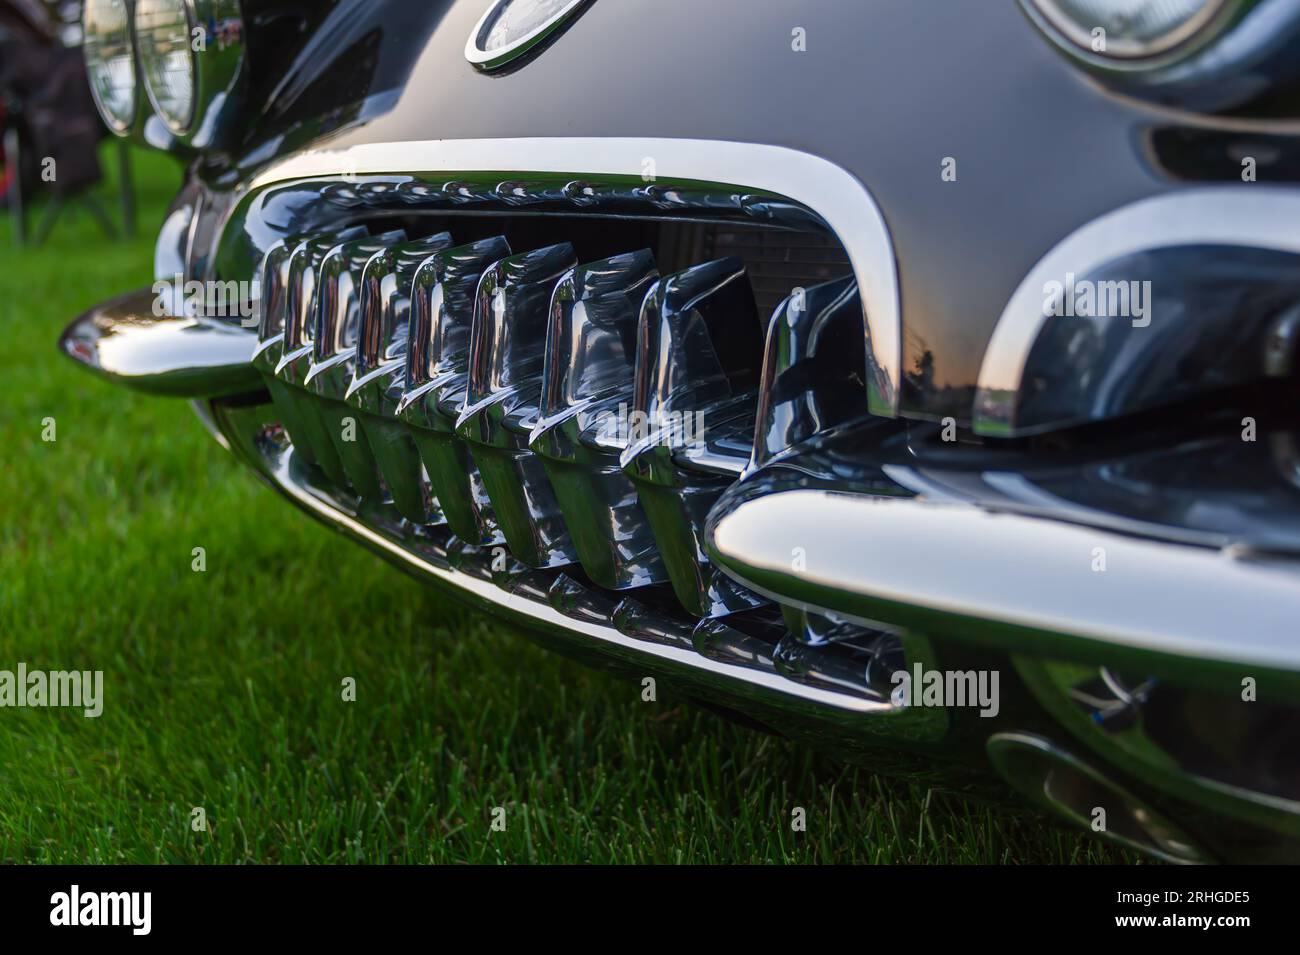 Close-up view of the 9-tooth grille on a 1960 Chevrolet Corvette at a weekly summer evening car show in New England, USA. Stock Photo